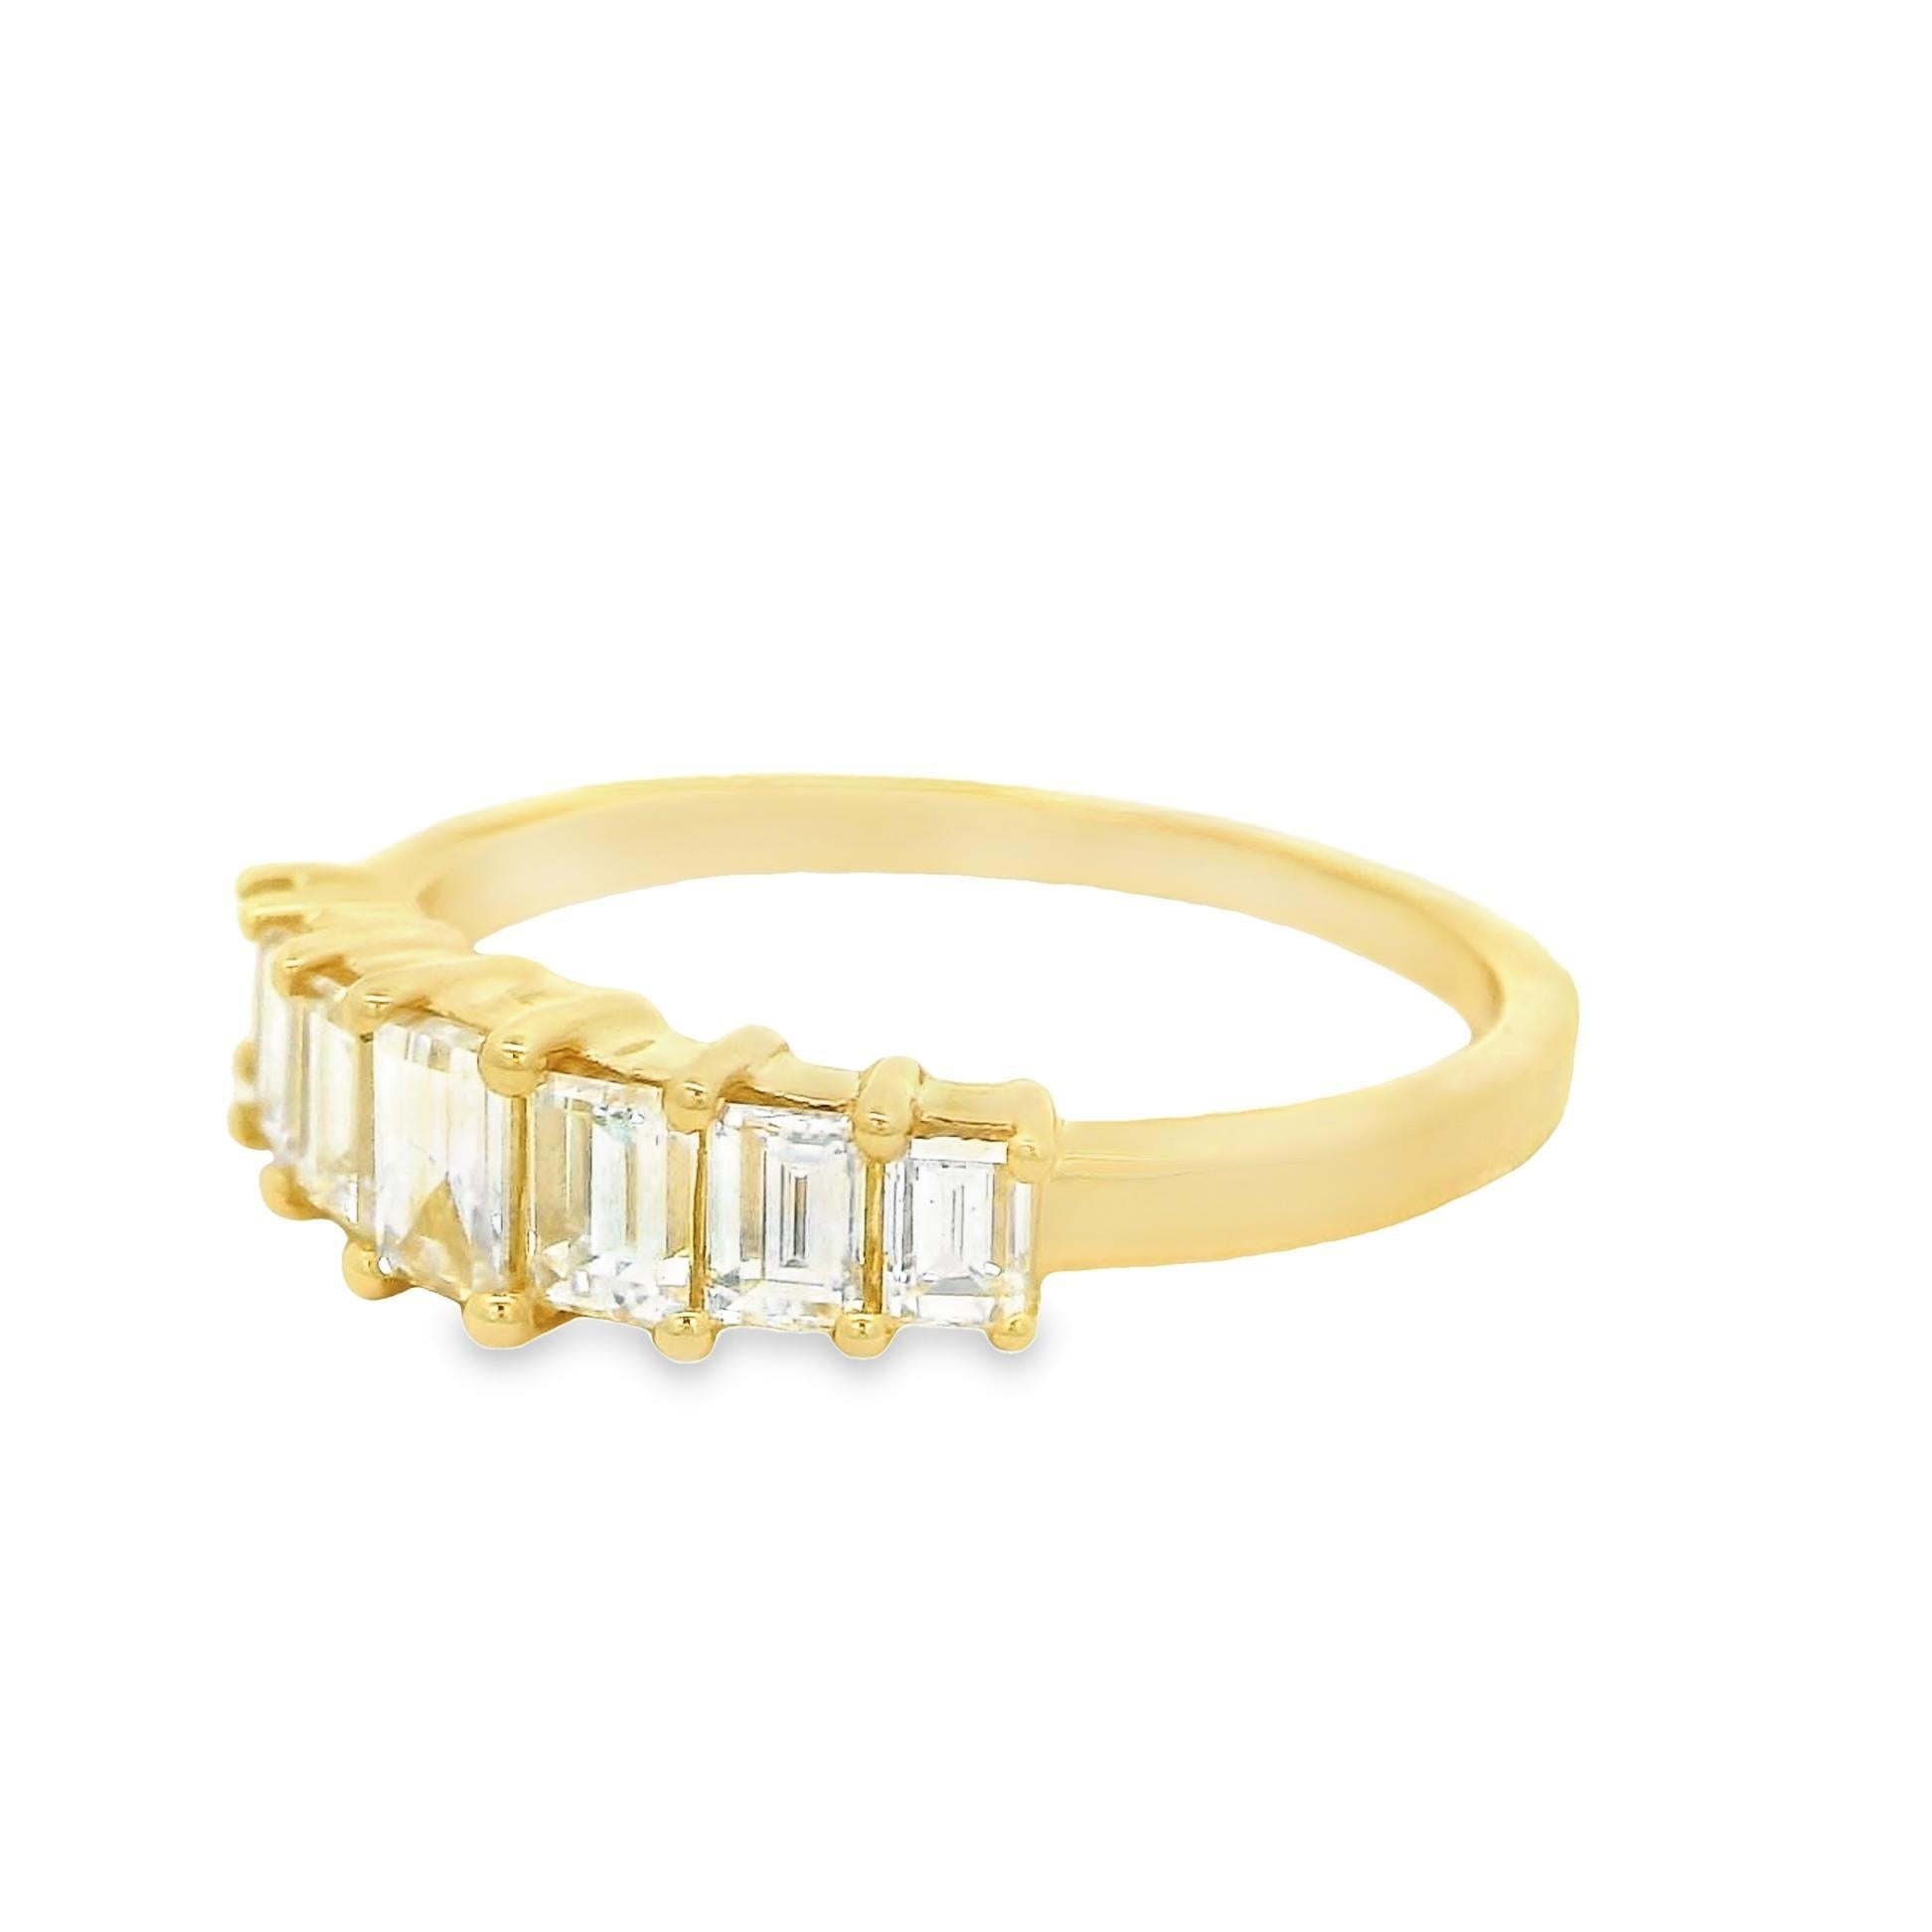 This simple 14k yellow gold band is a perfect piece to have as an everyday wear. Set with a total of 1.08 carats of baguette-cut diamonds which graduate in size from side to side. A perfect choice for a gift or to be worn for any occasion. Made in